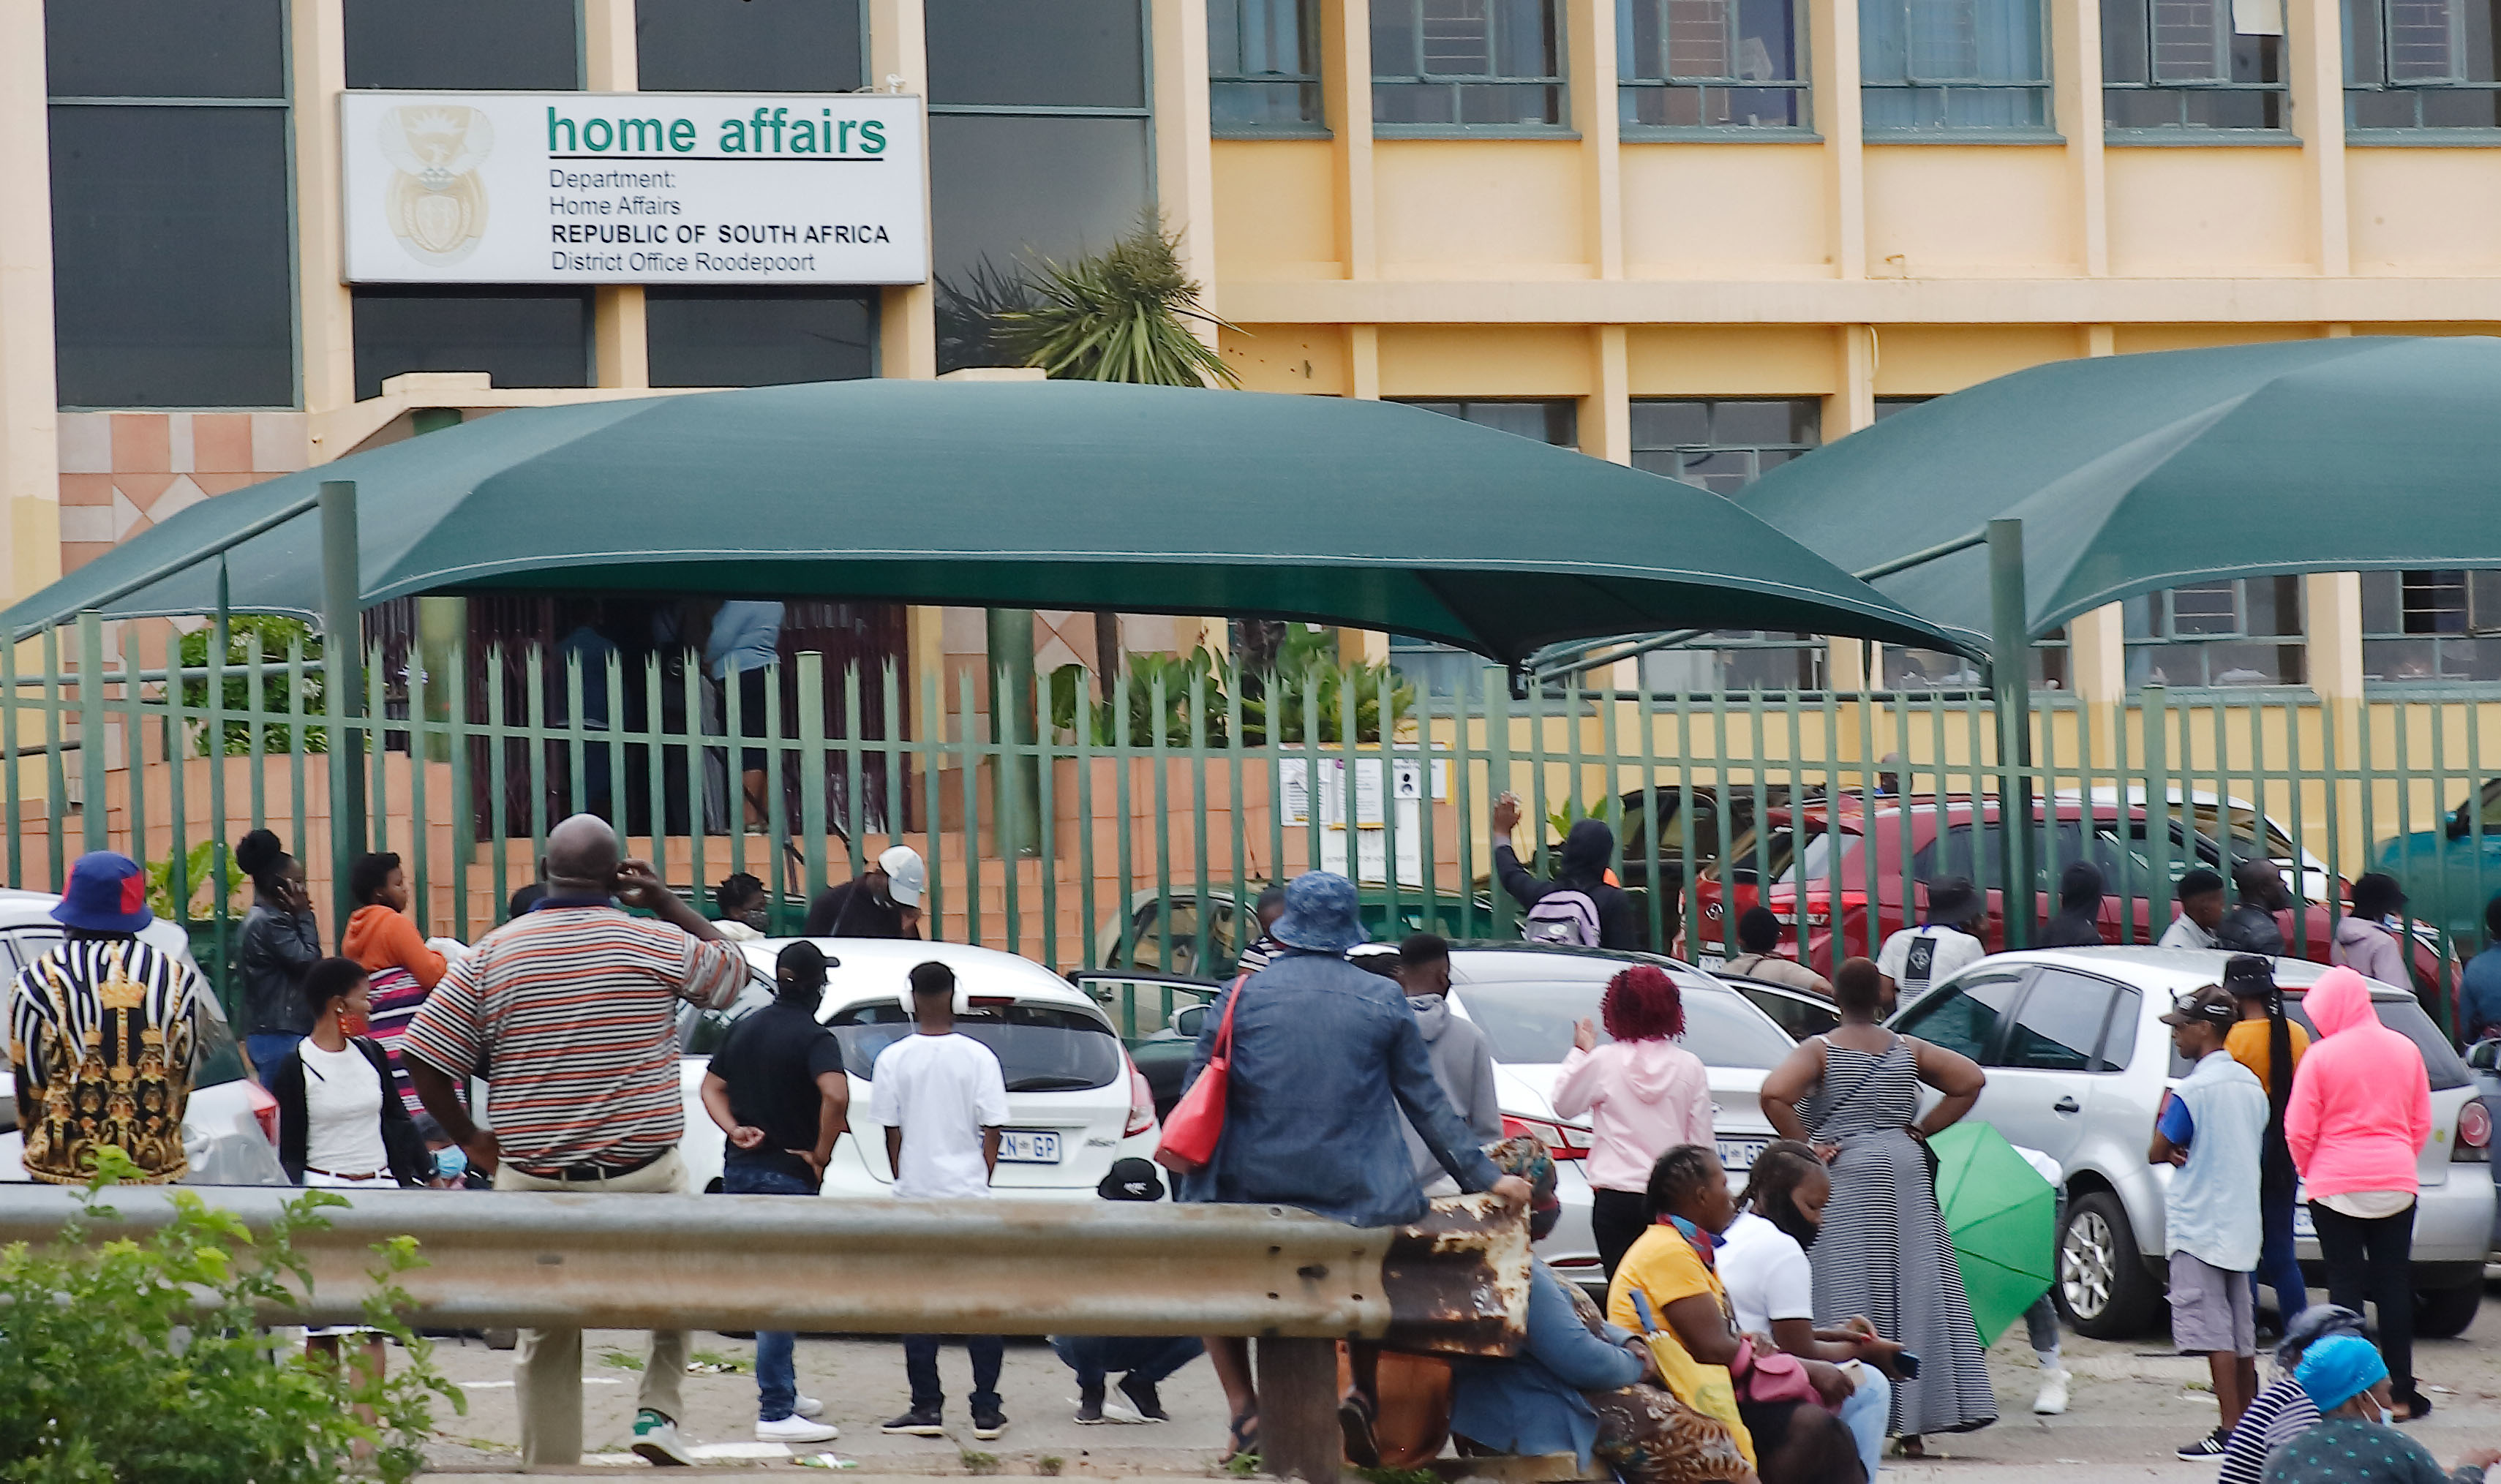 home affairs downtime roodepoort